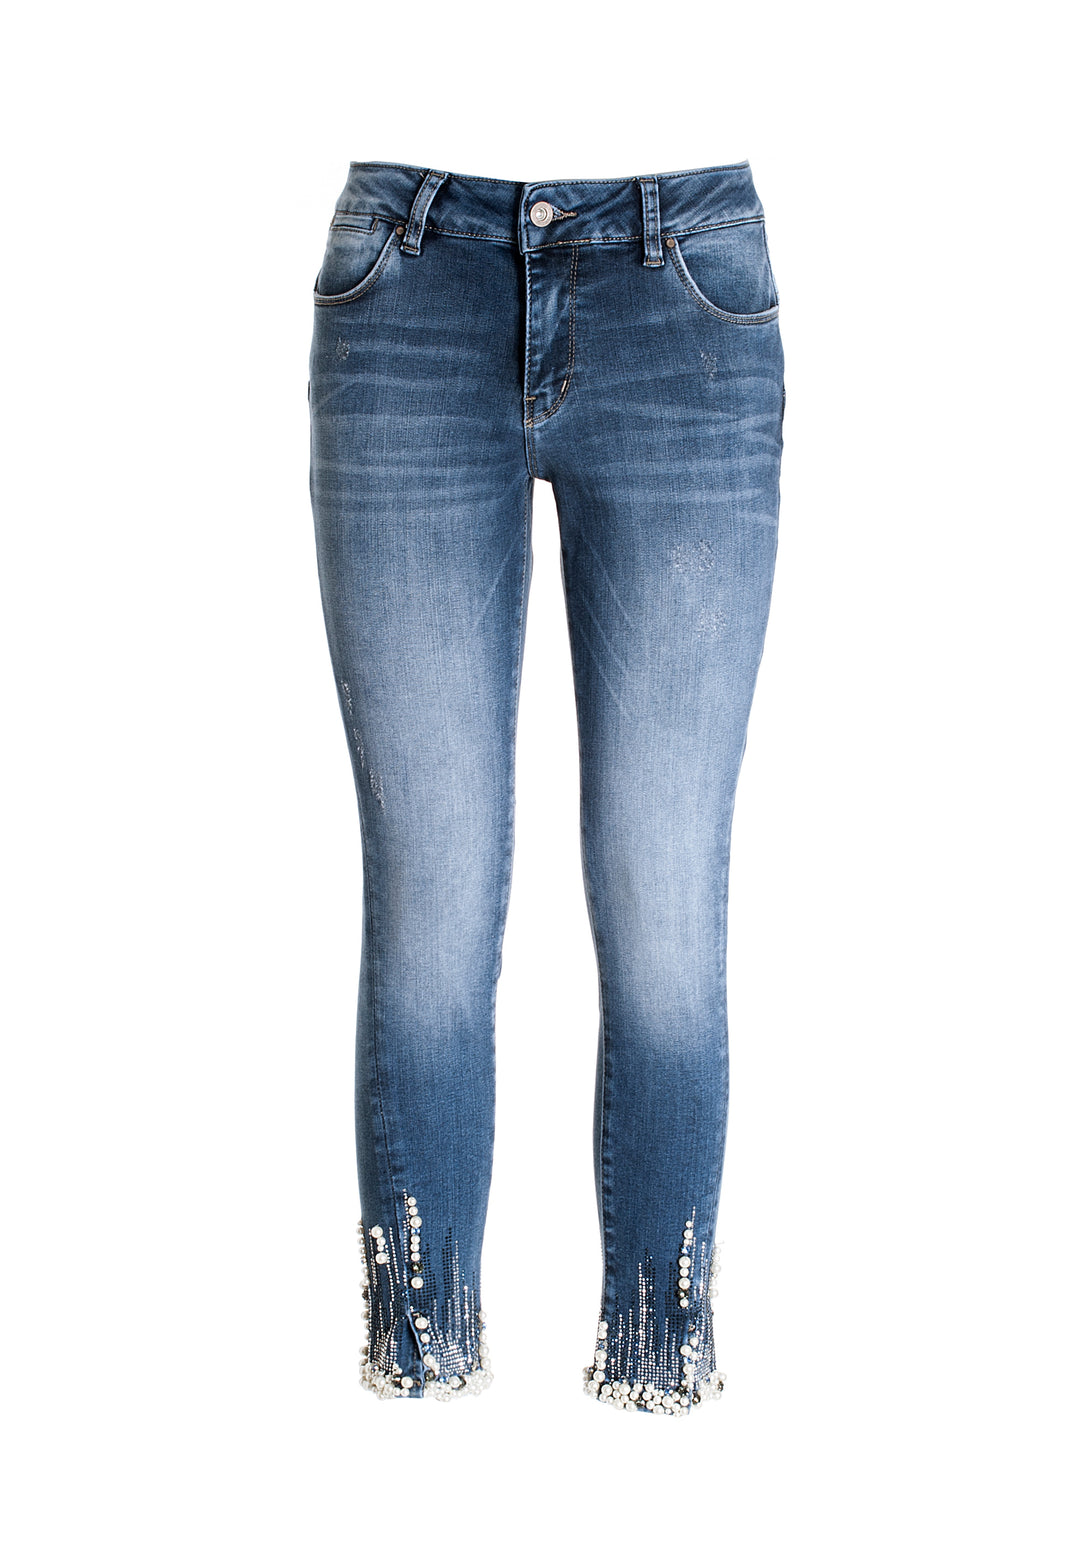 Jeans skinny fit cropped with push-up effect made in denim with middle wash